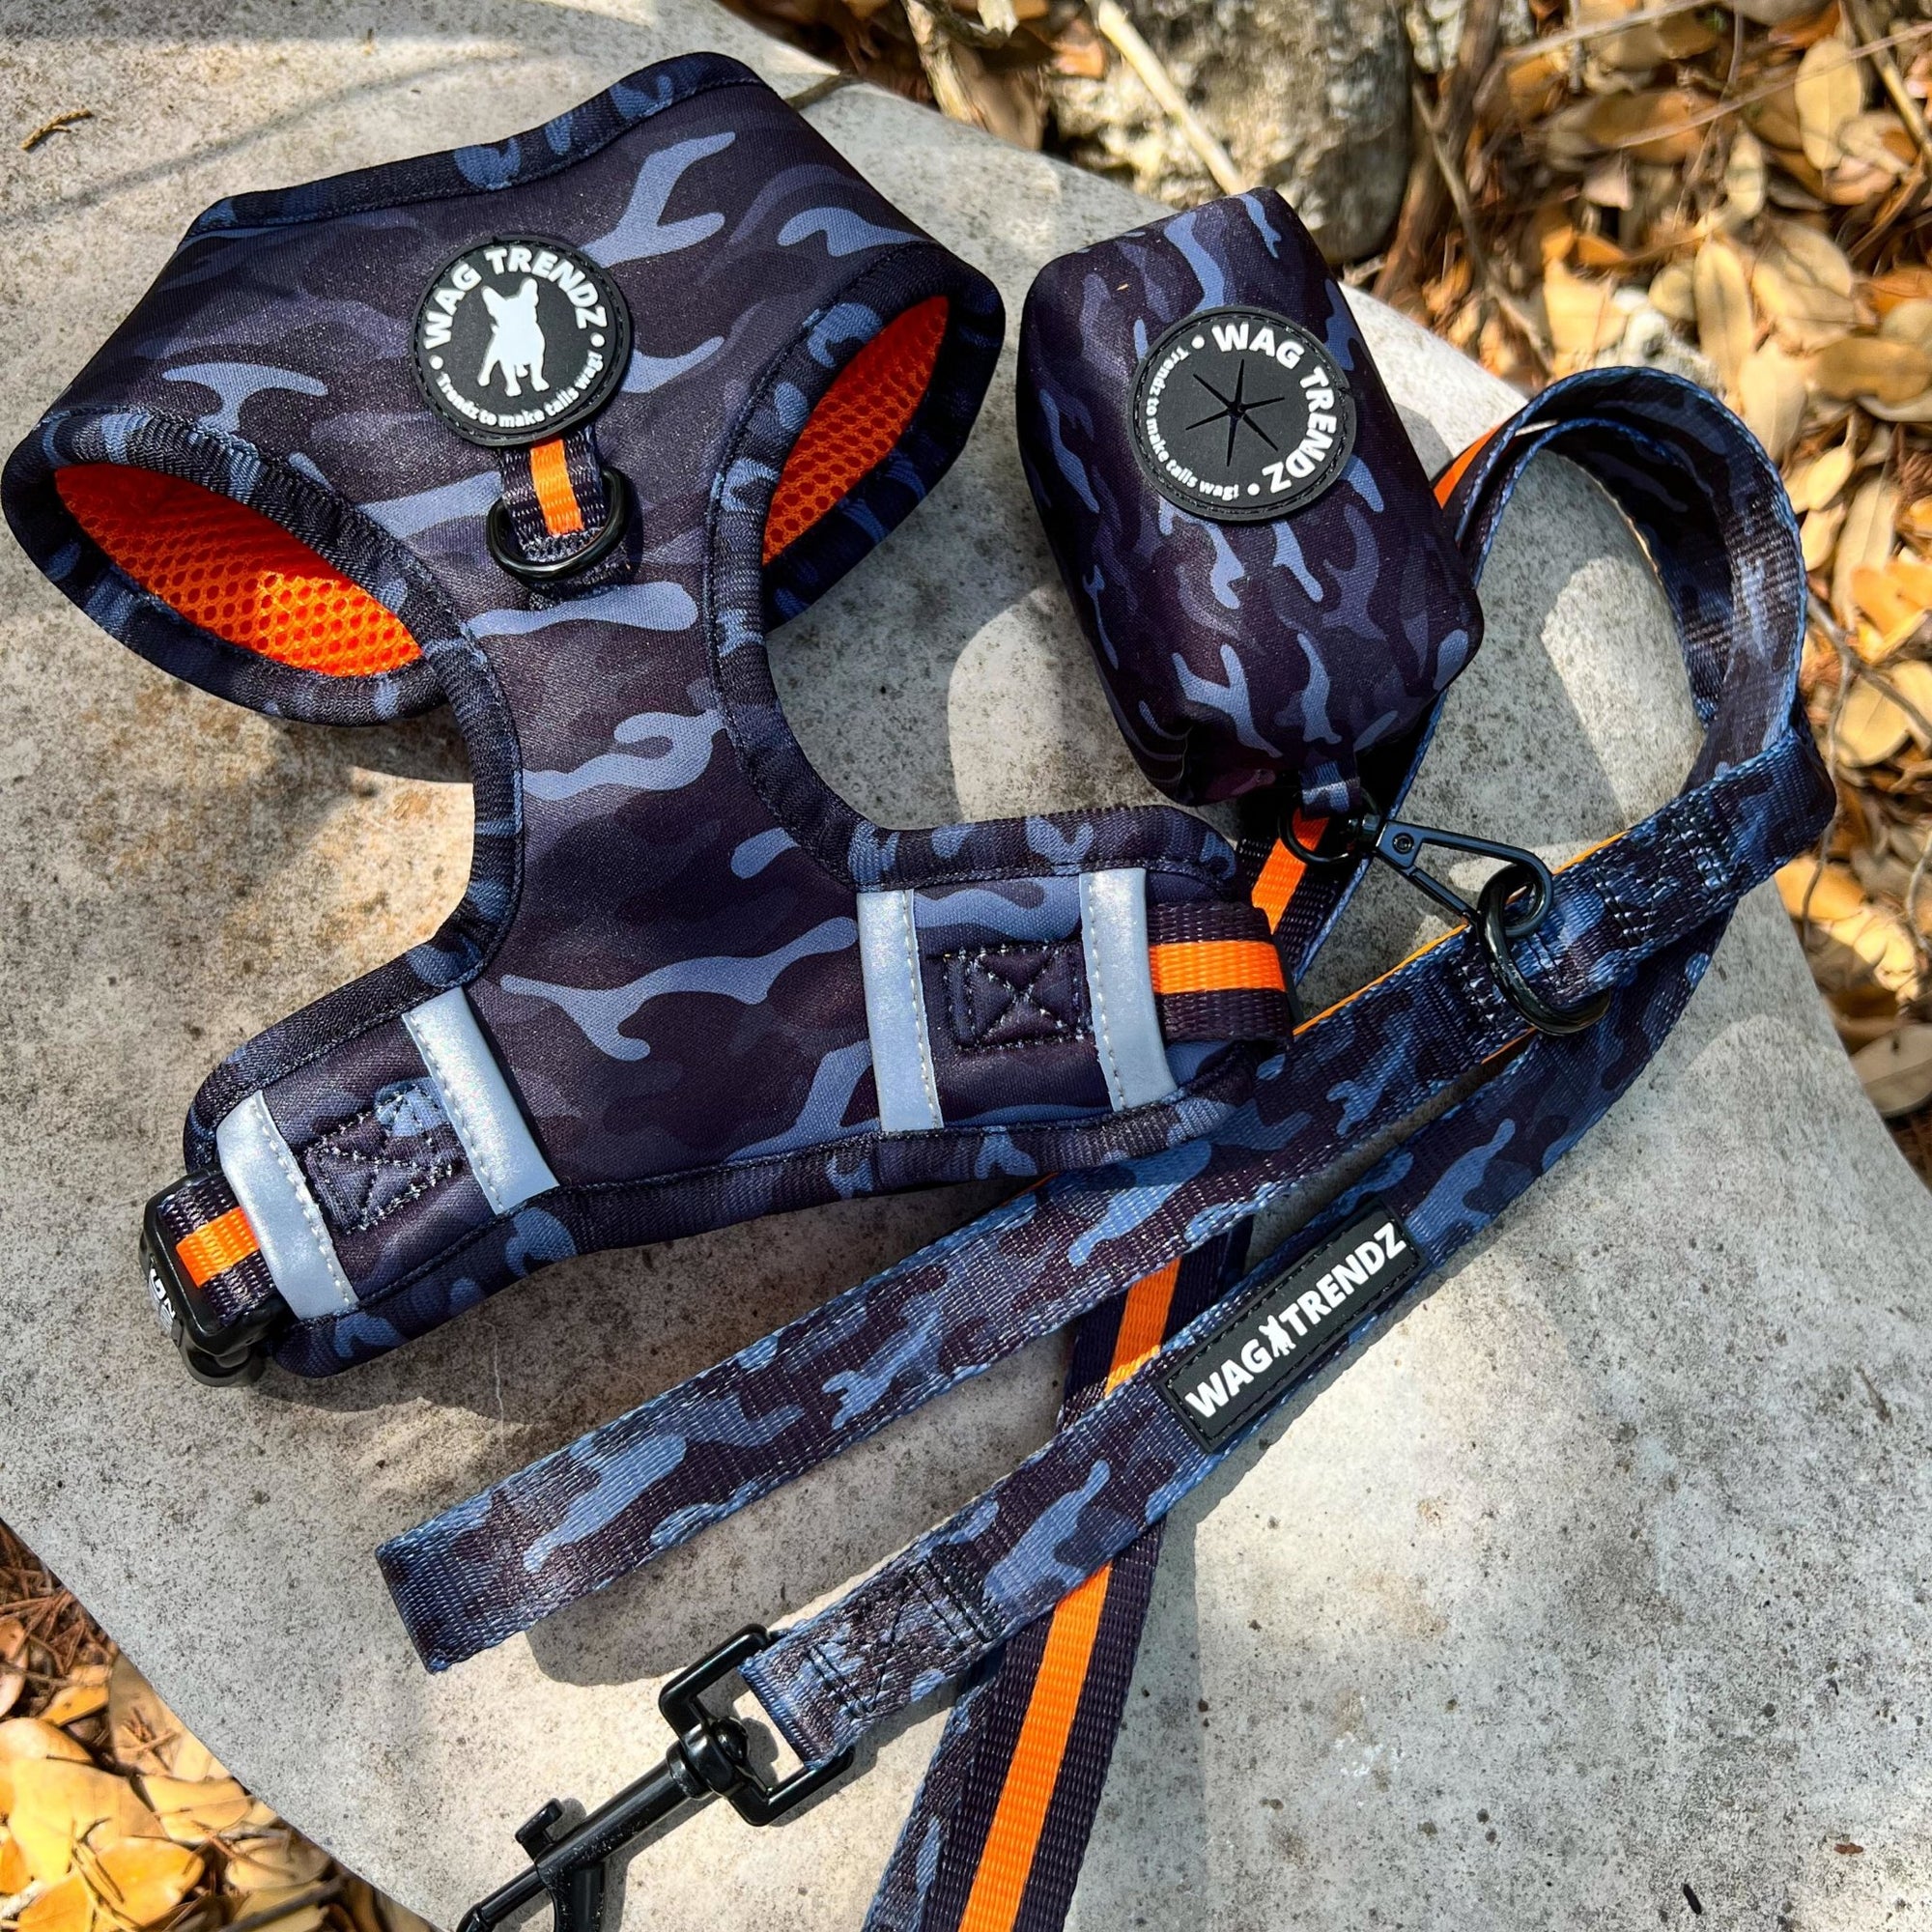 No Pull Dog Harness - black and gray camo with orange accents on dog adjustable harness vest with front clip - chest side view - matching dog leash and poop bag holder - laying outdoors in the sun on a rock  - Wag Trendz